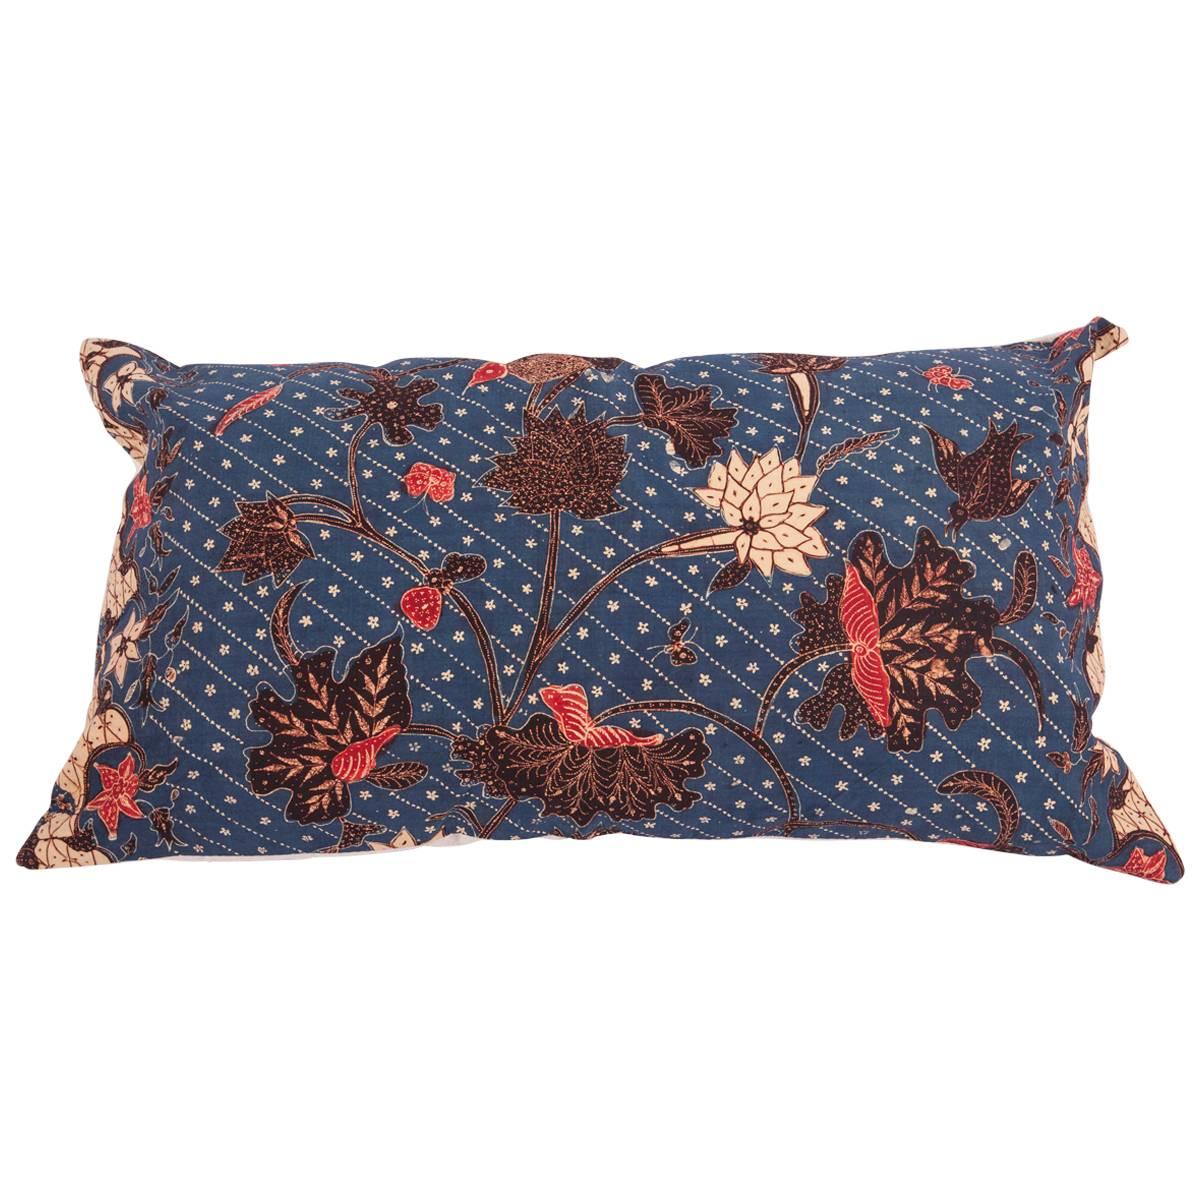 Batik Pillow Fashioned from an Early 20th Century Indonesian Batik Panel